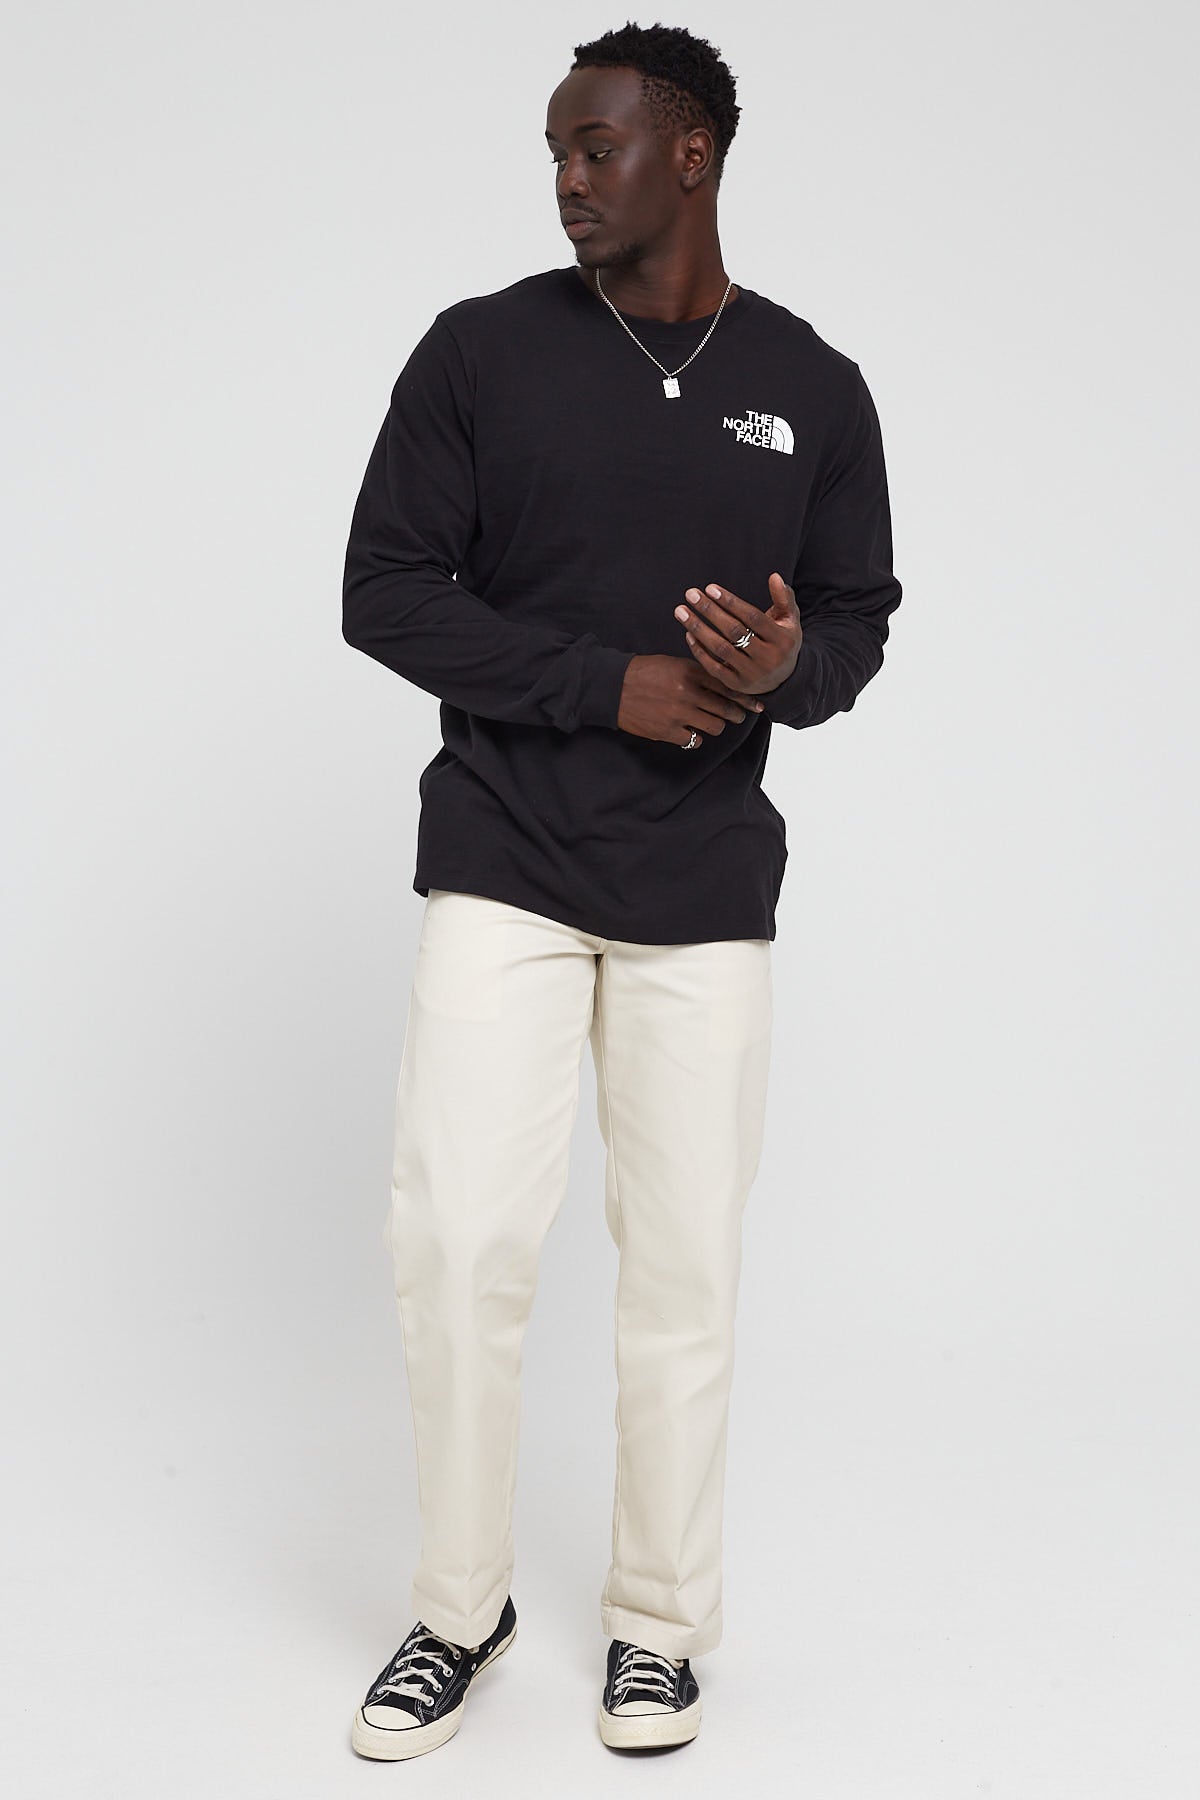 The North Face Box NSE LS Tee Black/White